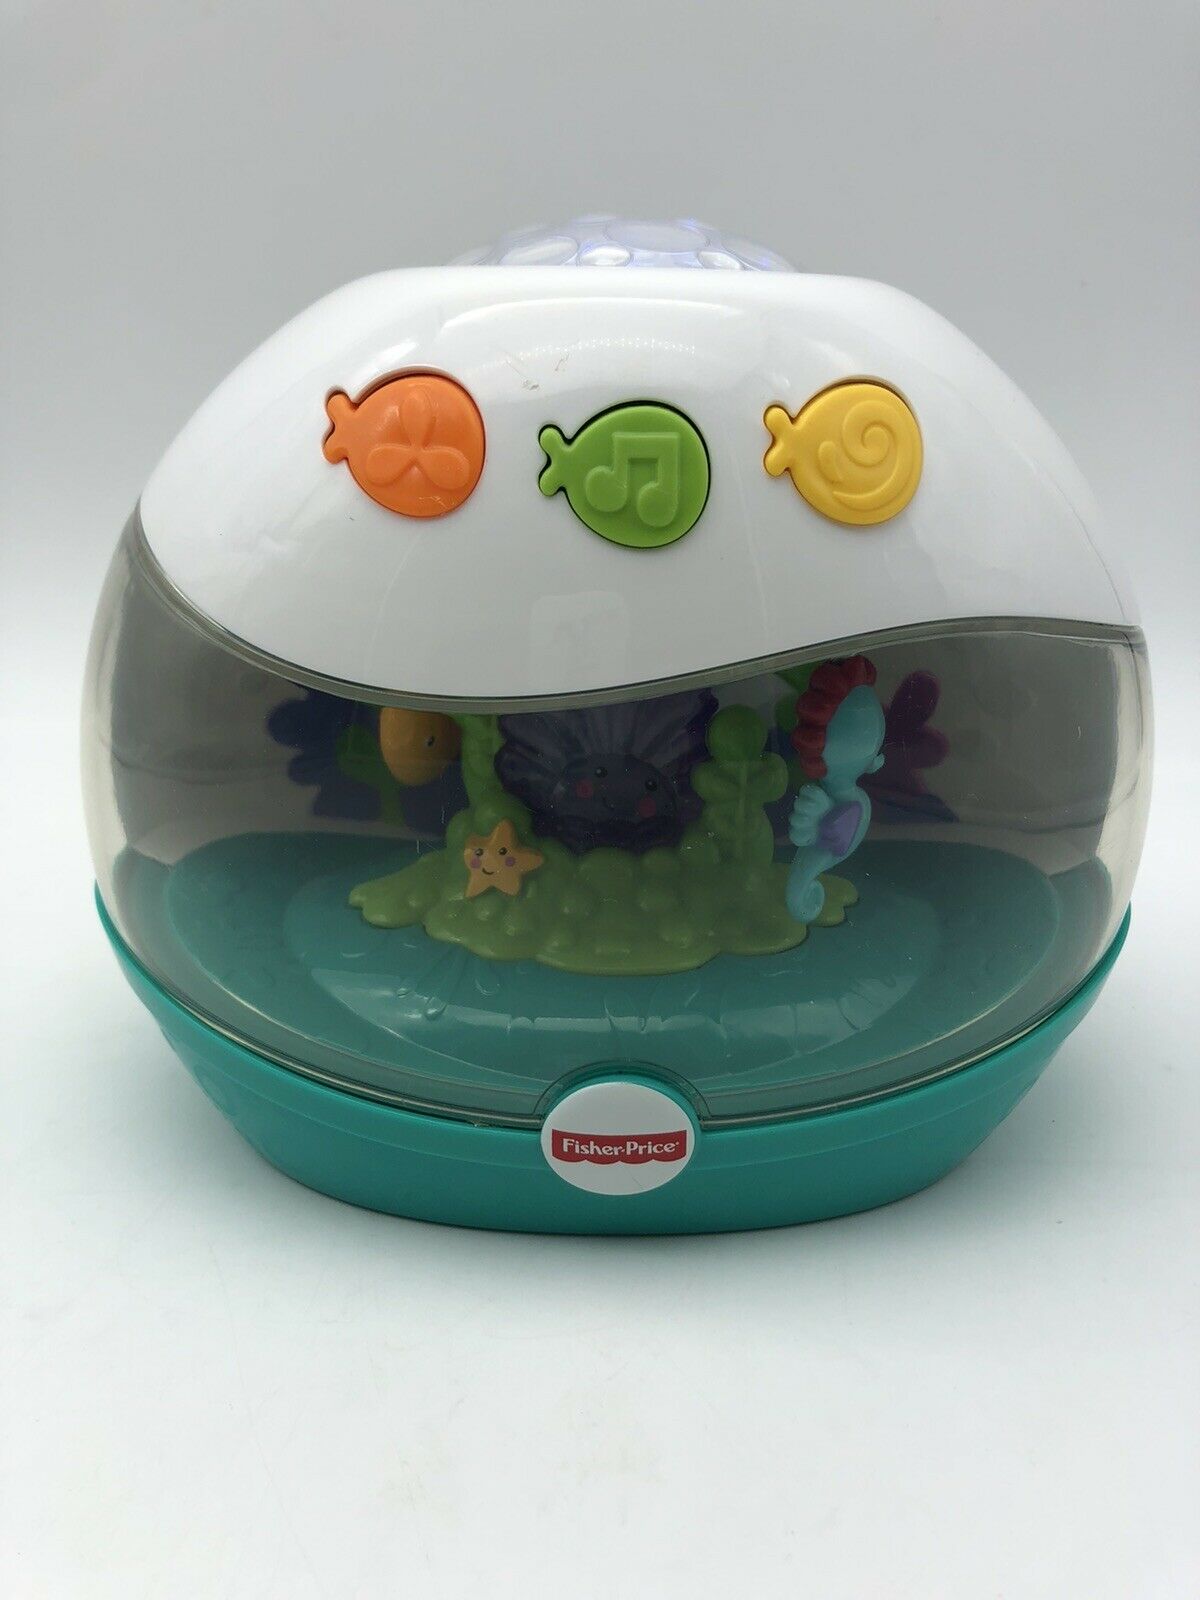 Fisher Price Calming Seas Projection Soother Fish Bowl Aquarium Tested & Works